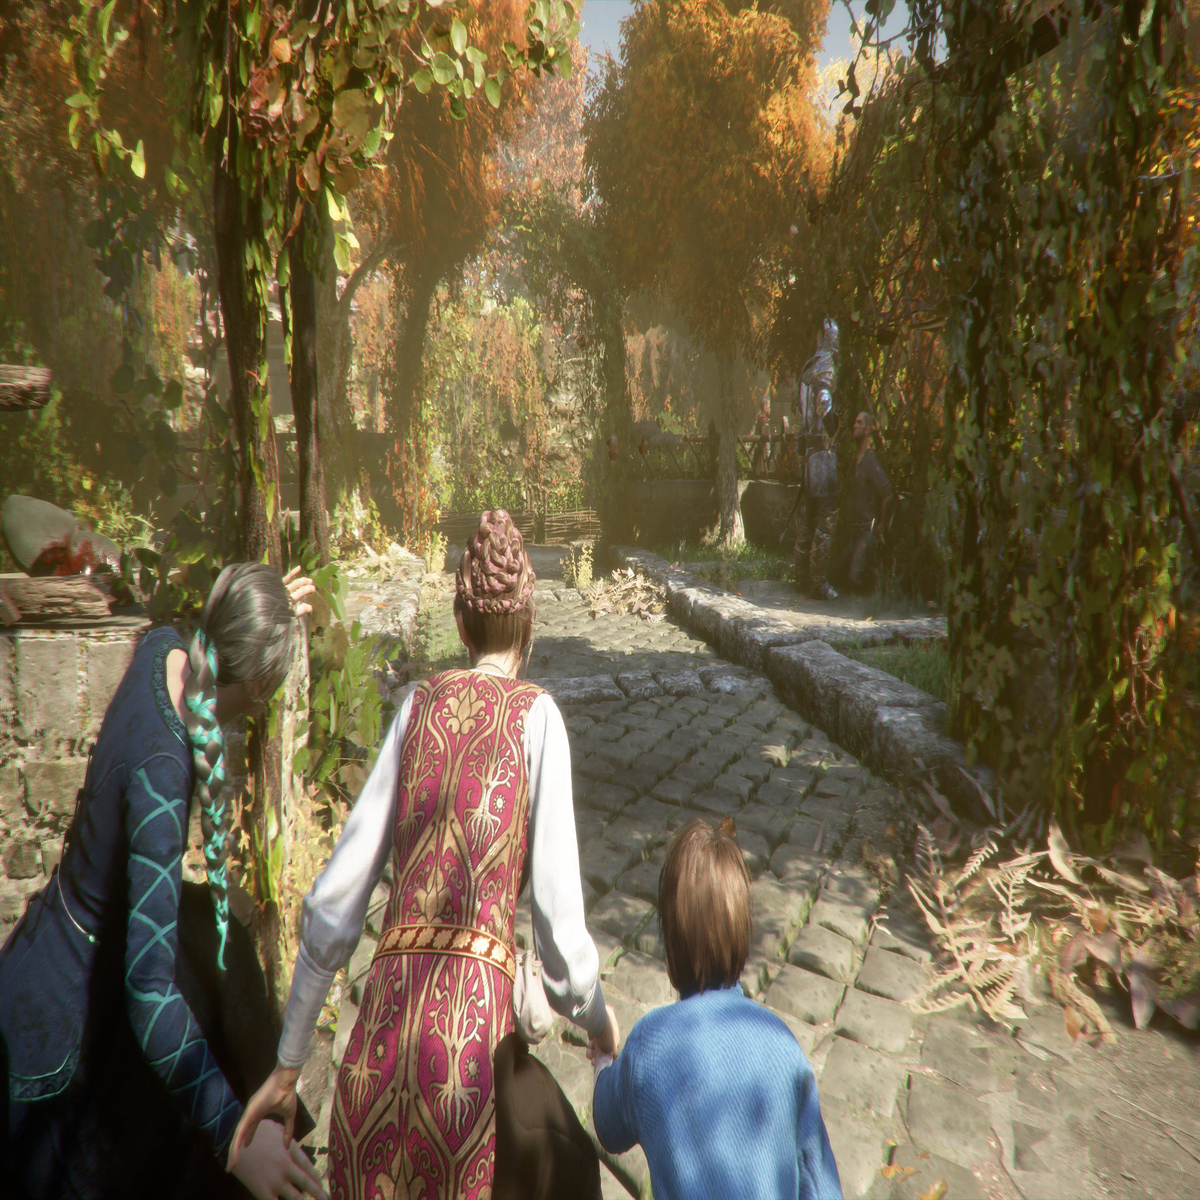 This is horrific - A plague tale: Innocence [Image] : r/PS4